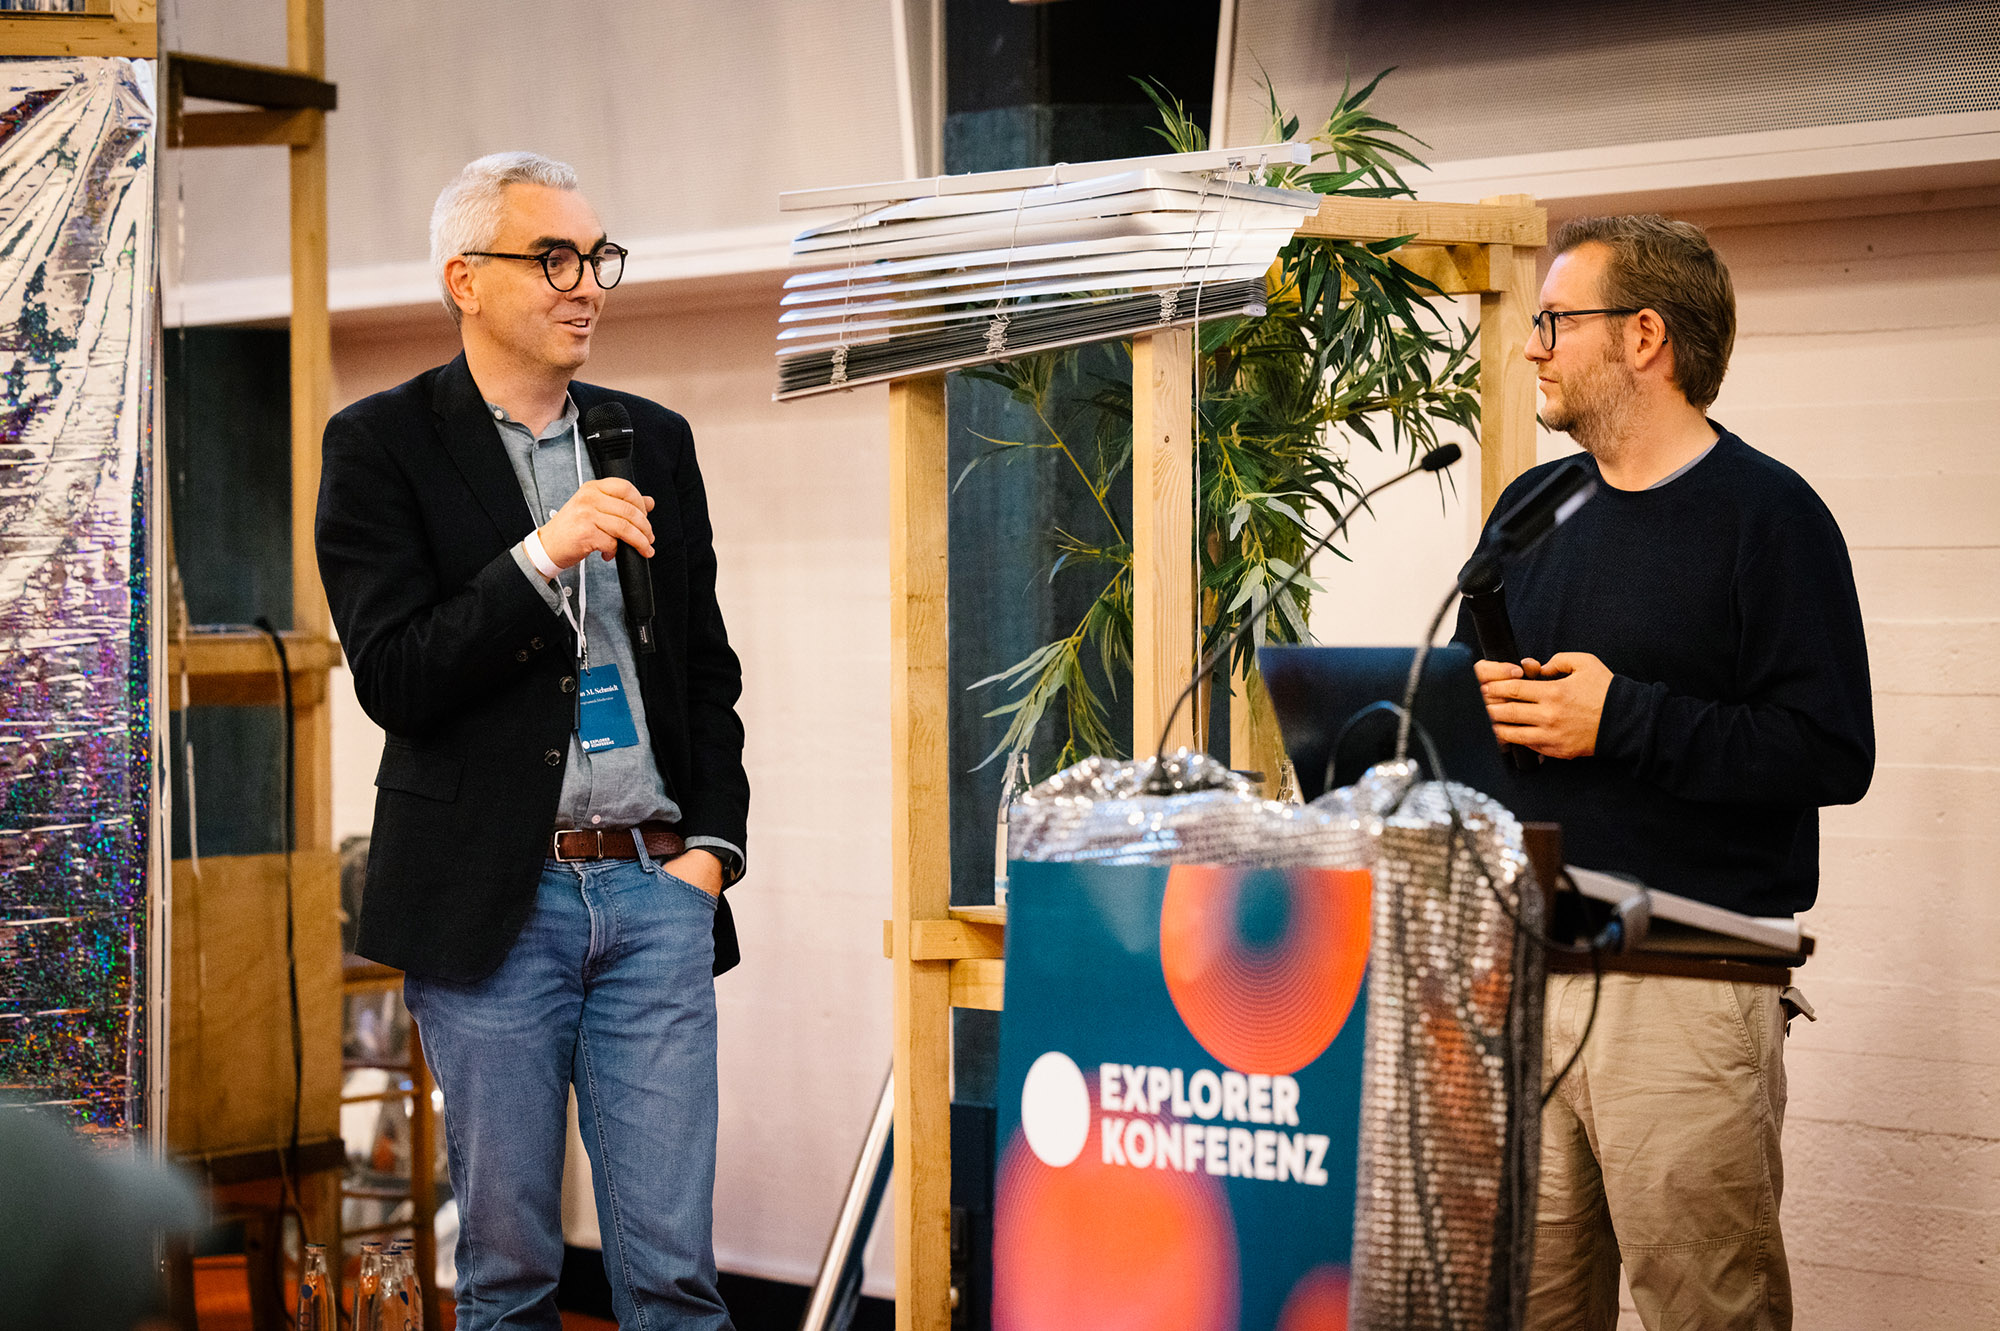 the Explorer Conference took place for the third time as part of Filmfest Hamburg and highlighted the changes in producing for film, television and streaming with numerous speakers. Copyright: Maximilian Probst | MOIN Filmförderung